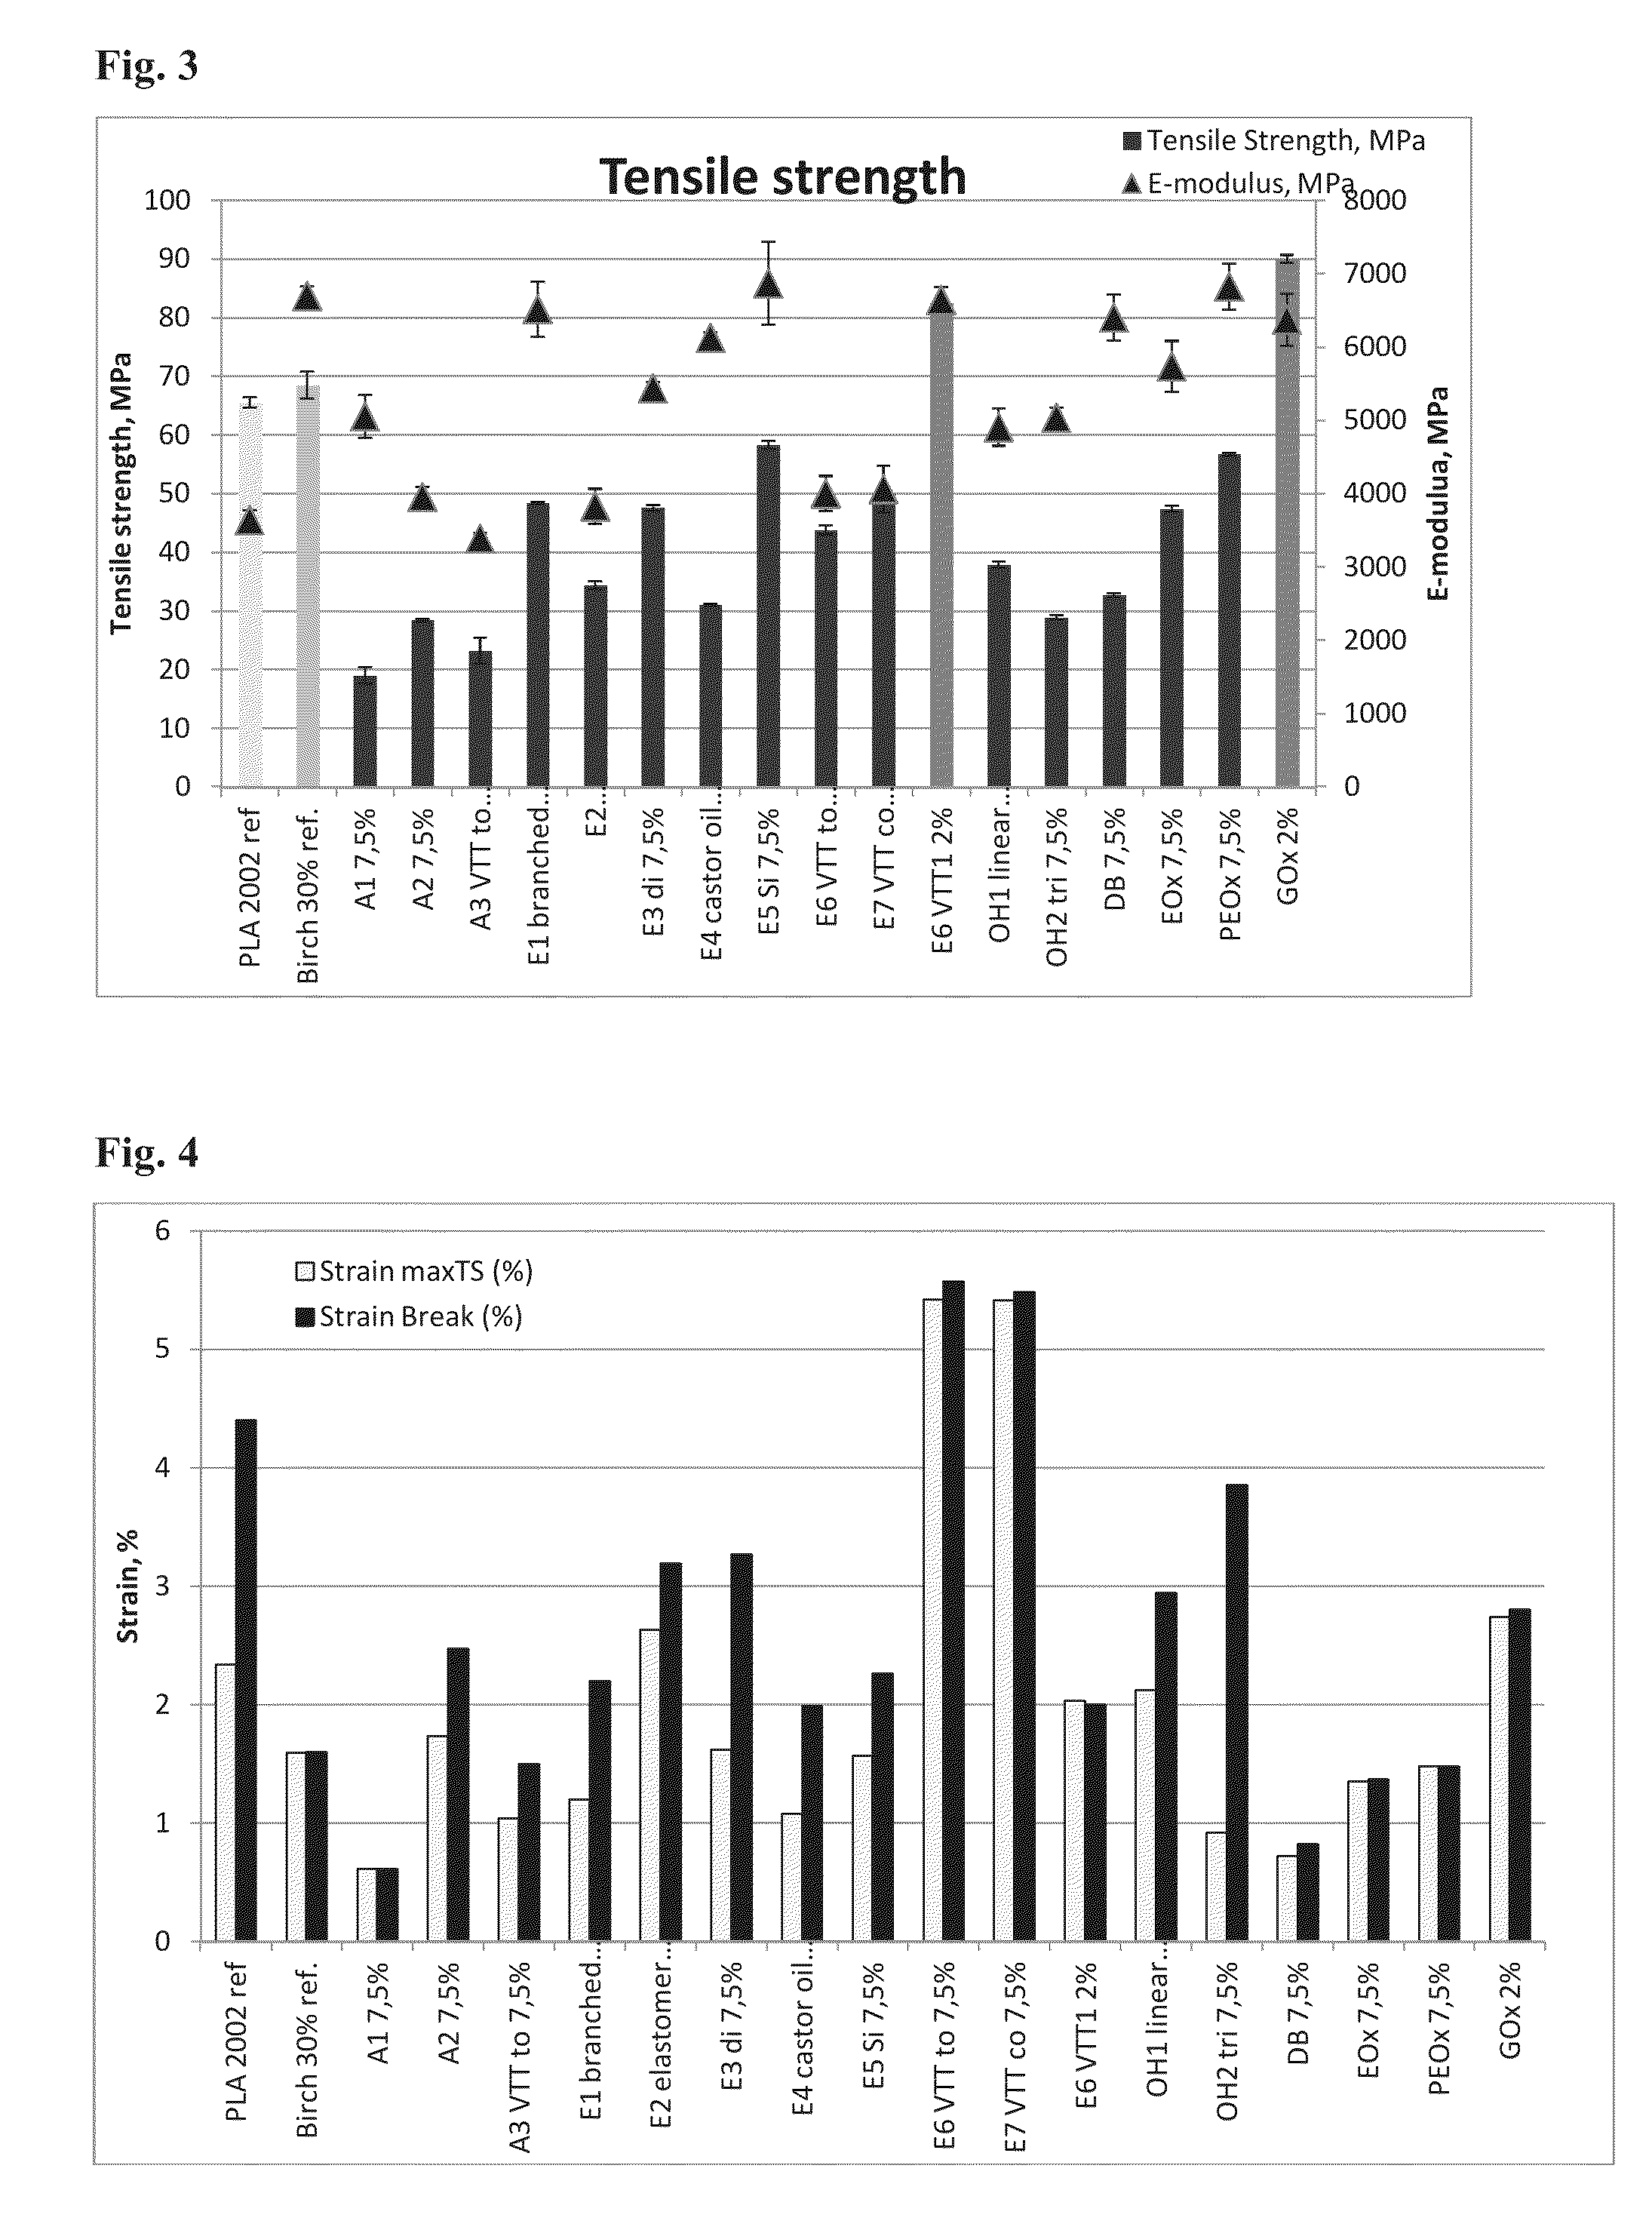 Process for manufacturing a thermoformable plasticized composite containing cellulose fiber and a moldable polymer